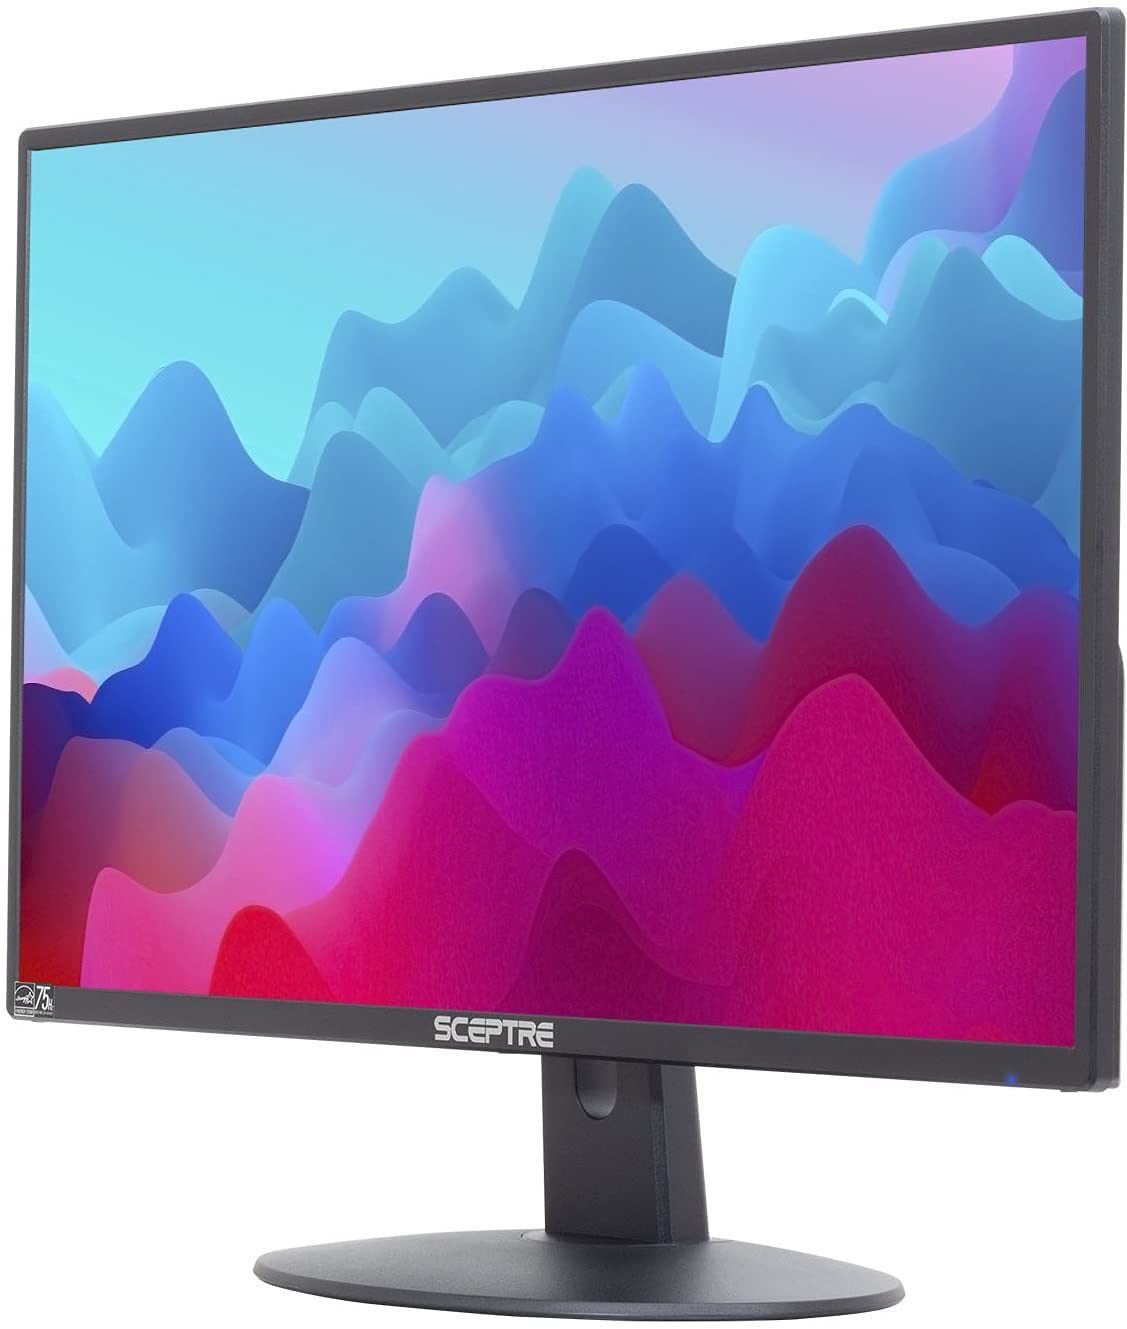 Sceptre 20" 1600X900 75Hz Ultra Thin LED Monitor 2X HDMI VGA Built-In Speakers, Machine Black Wide Viewing Angle 170° (Horizontal) / 160° (Vertical)